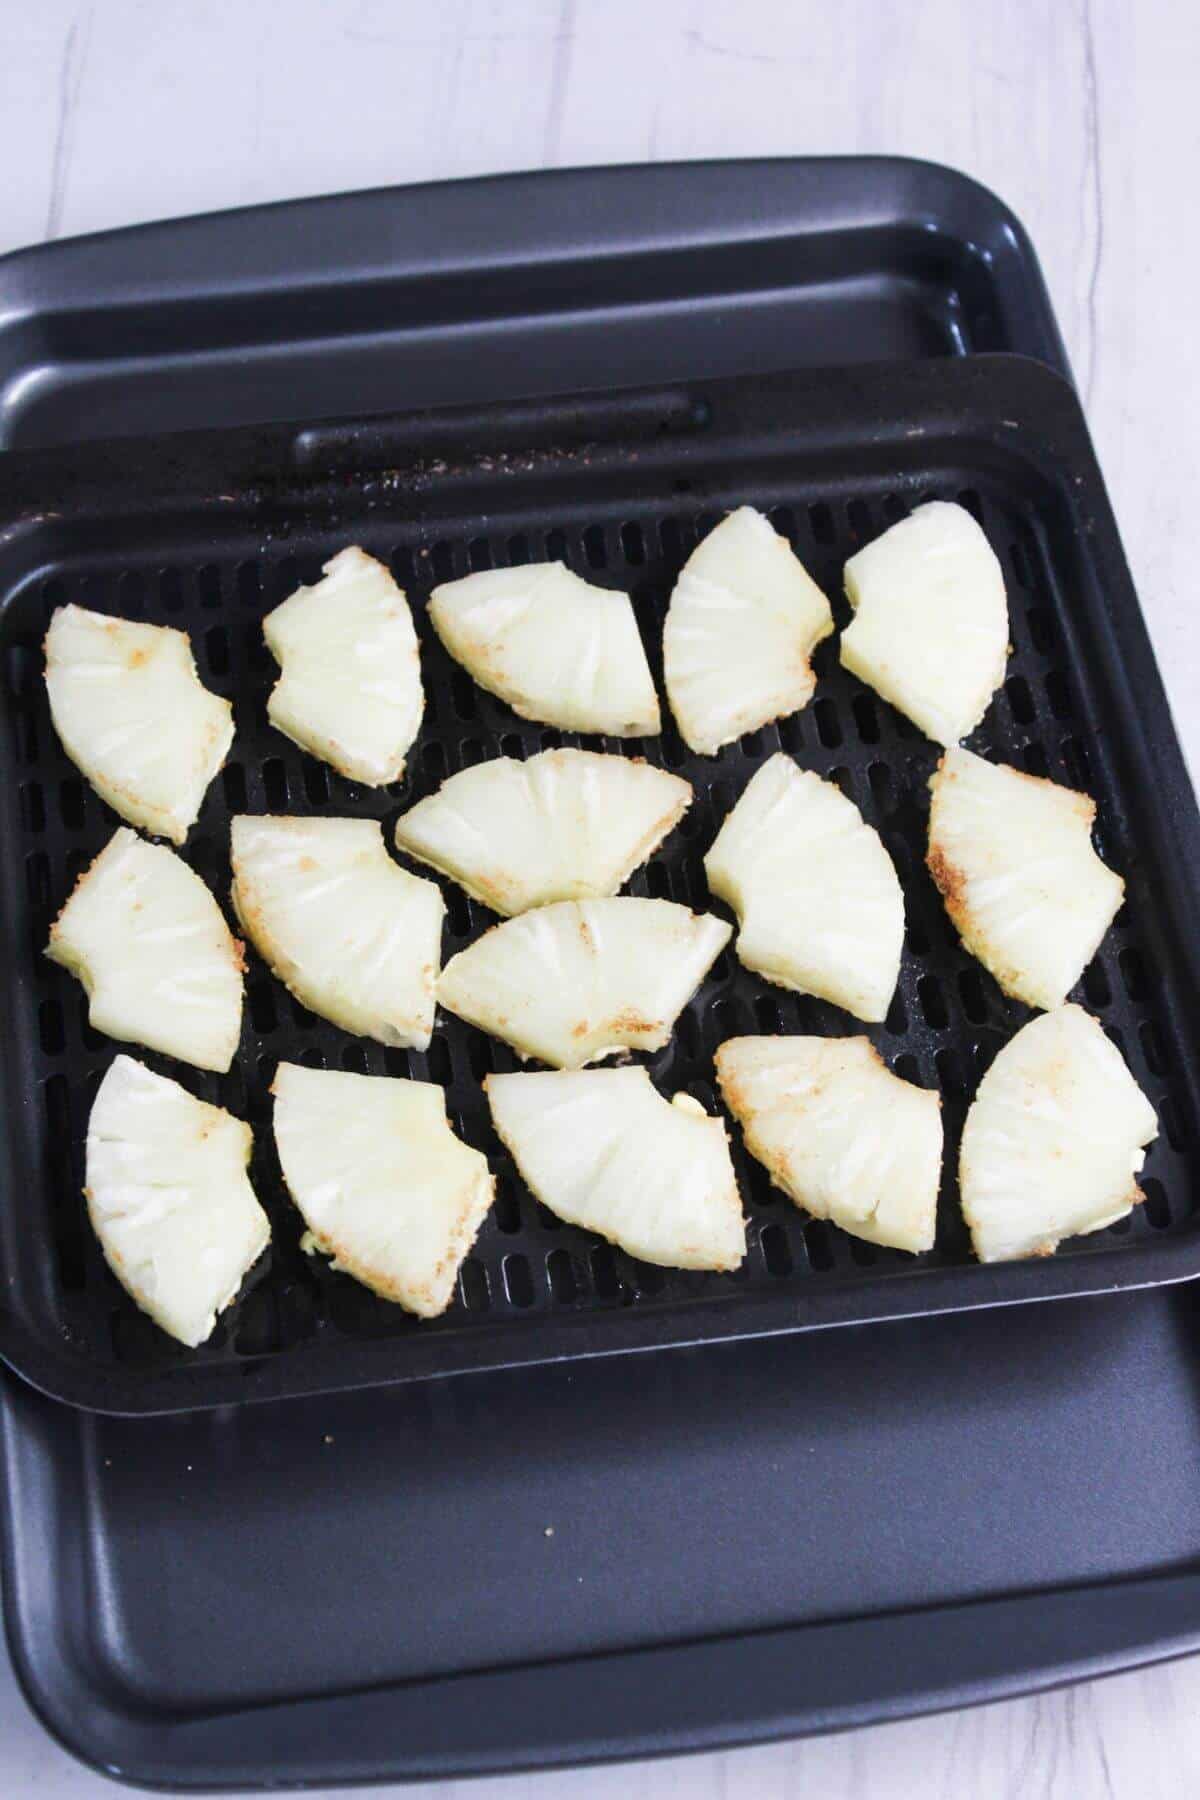 Sliced pineapple on a an air fryer tray.